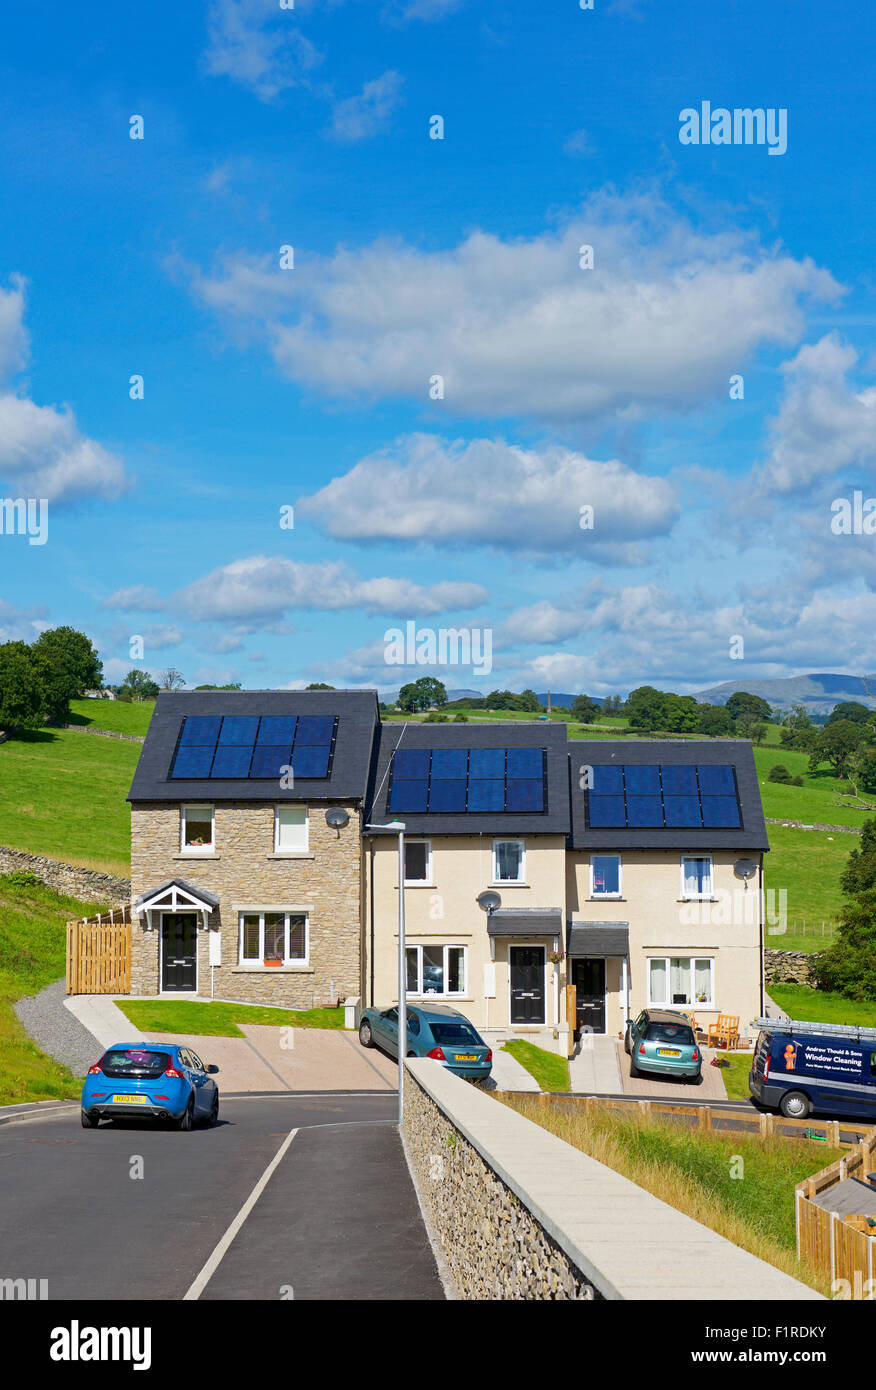 New housing - Fir Tree Rise - with all houses having solar panels, Kendal, Cumbria, England UK Stock Photo